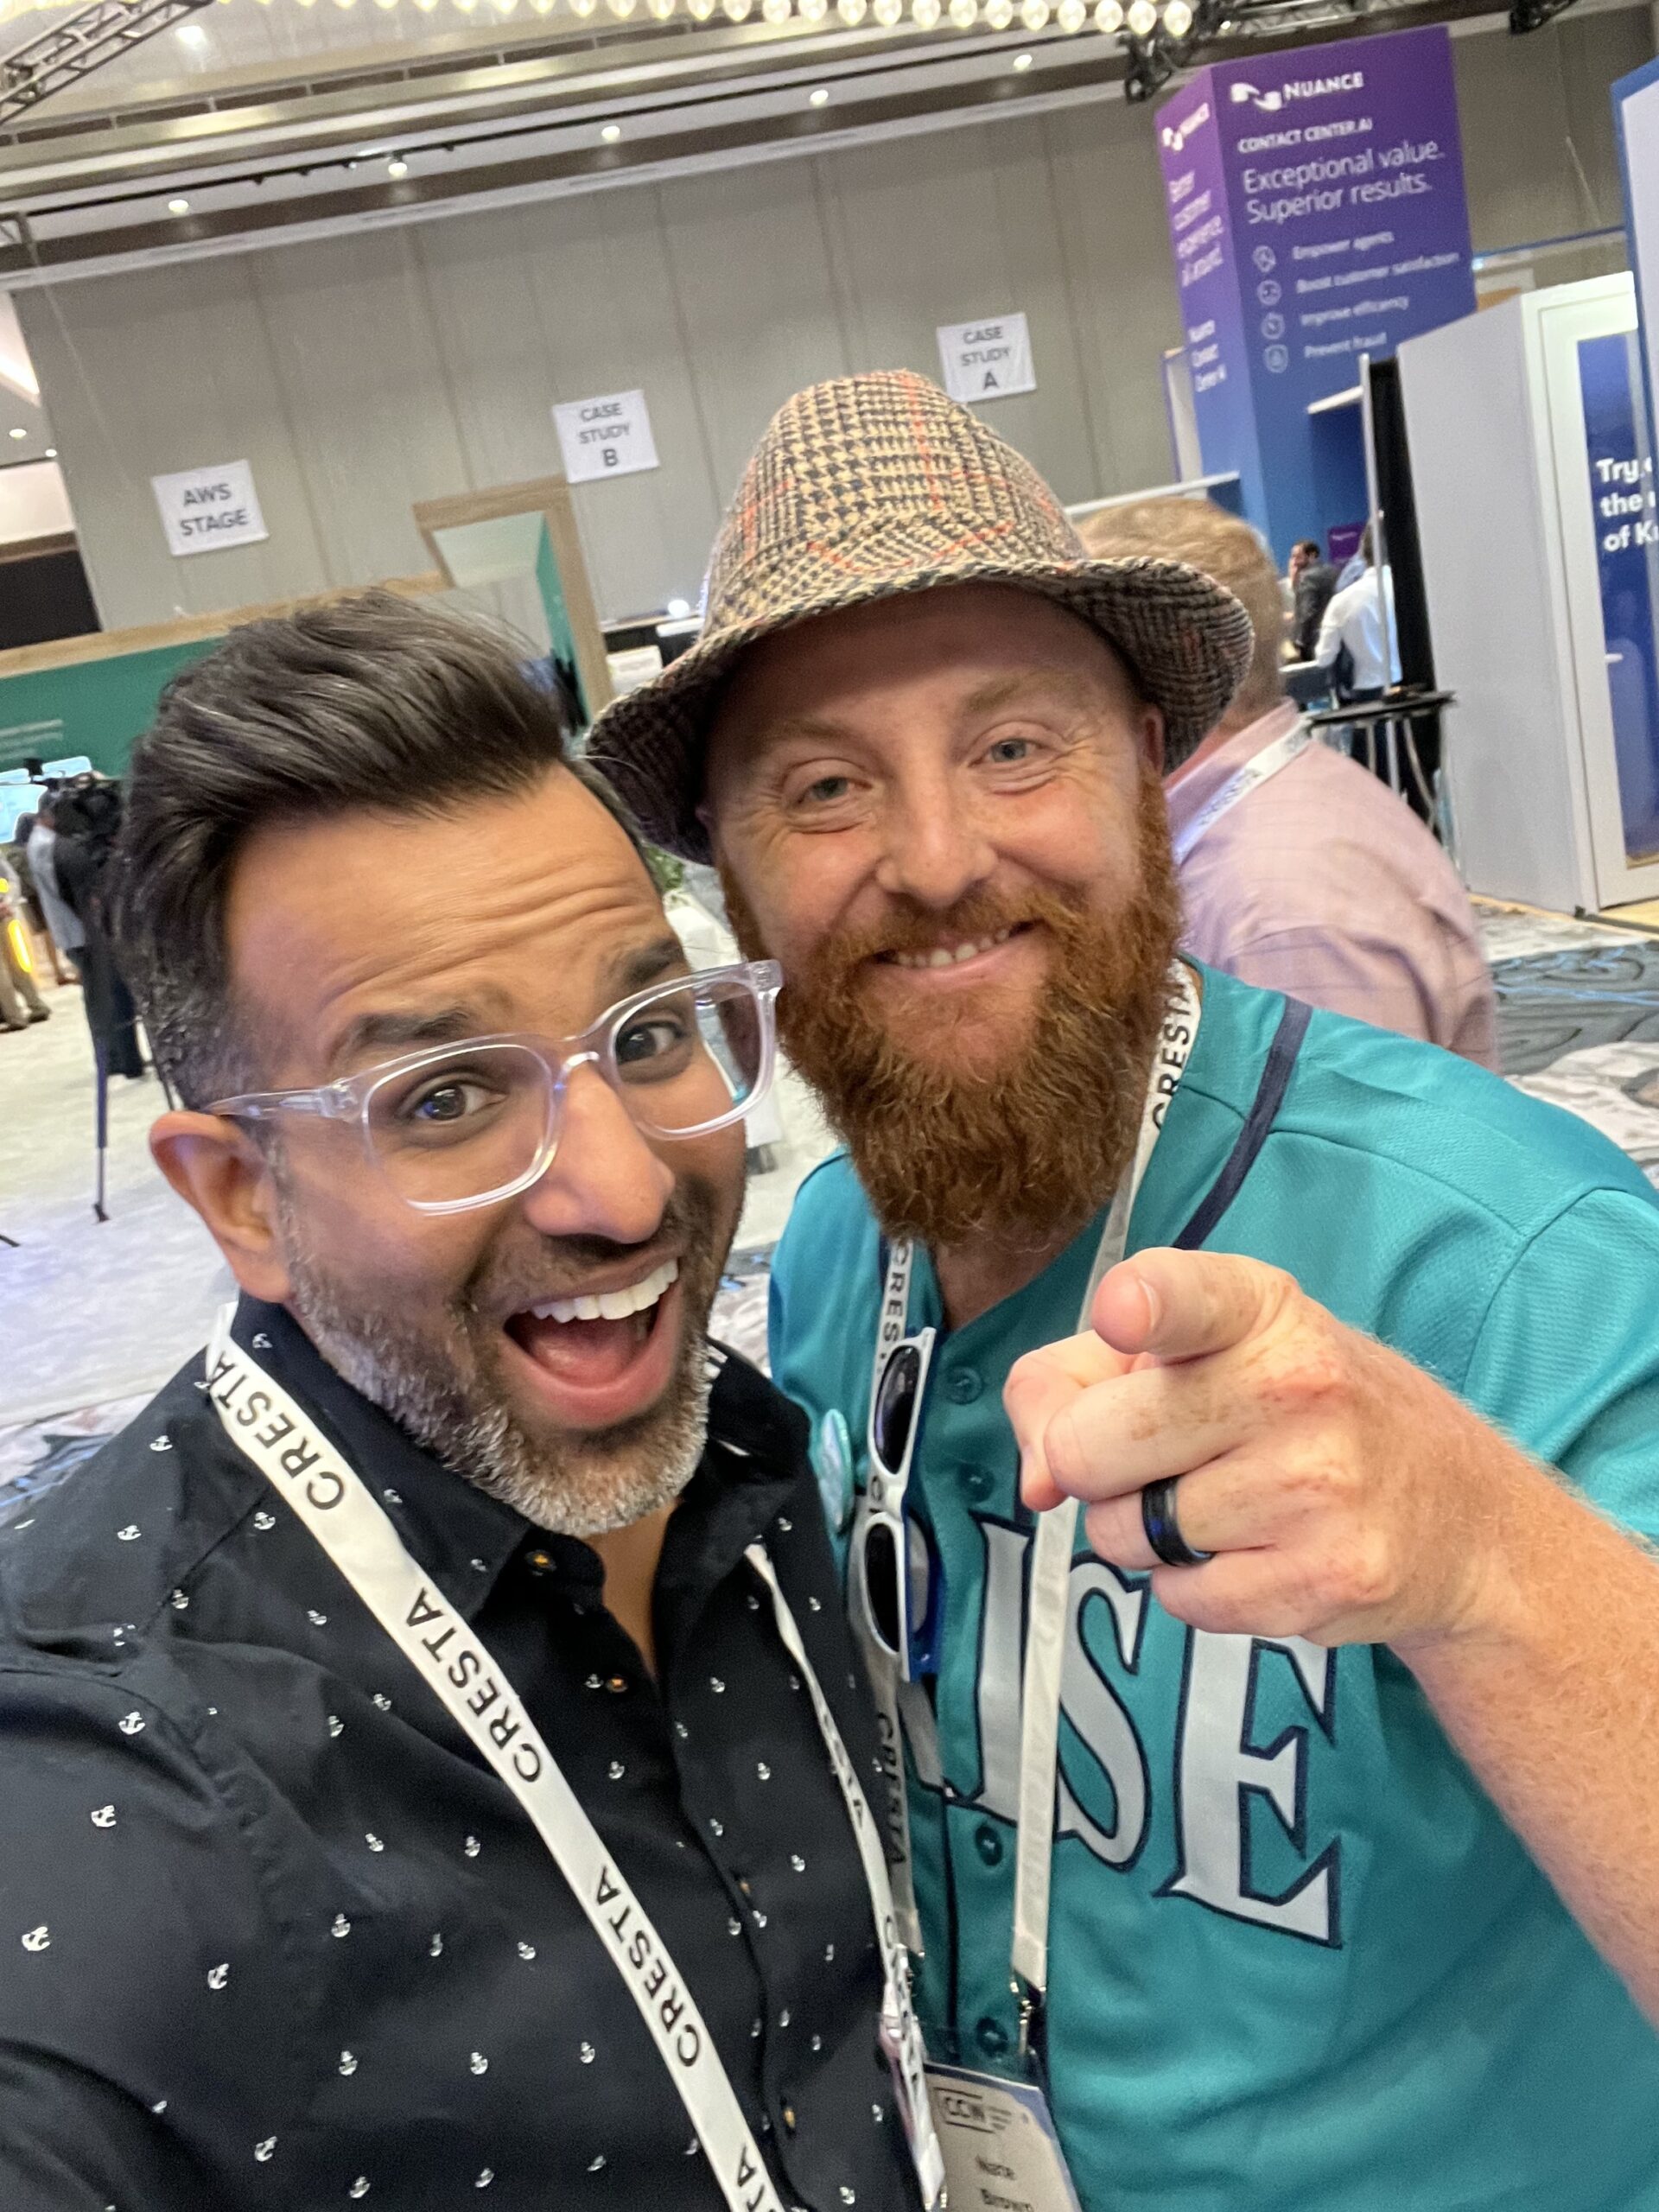 Selfie of Ravin Shah (Hellohire CEO) and Nate Brown (Senior Director of CX at Arise)